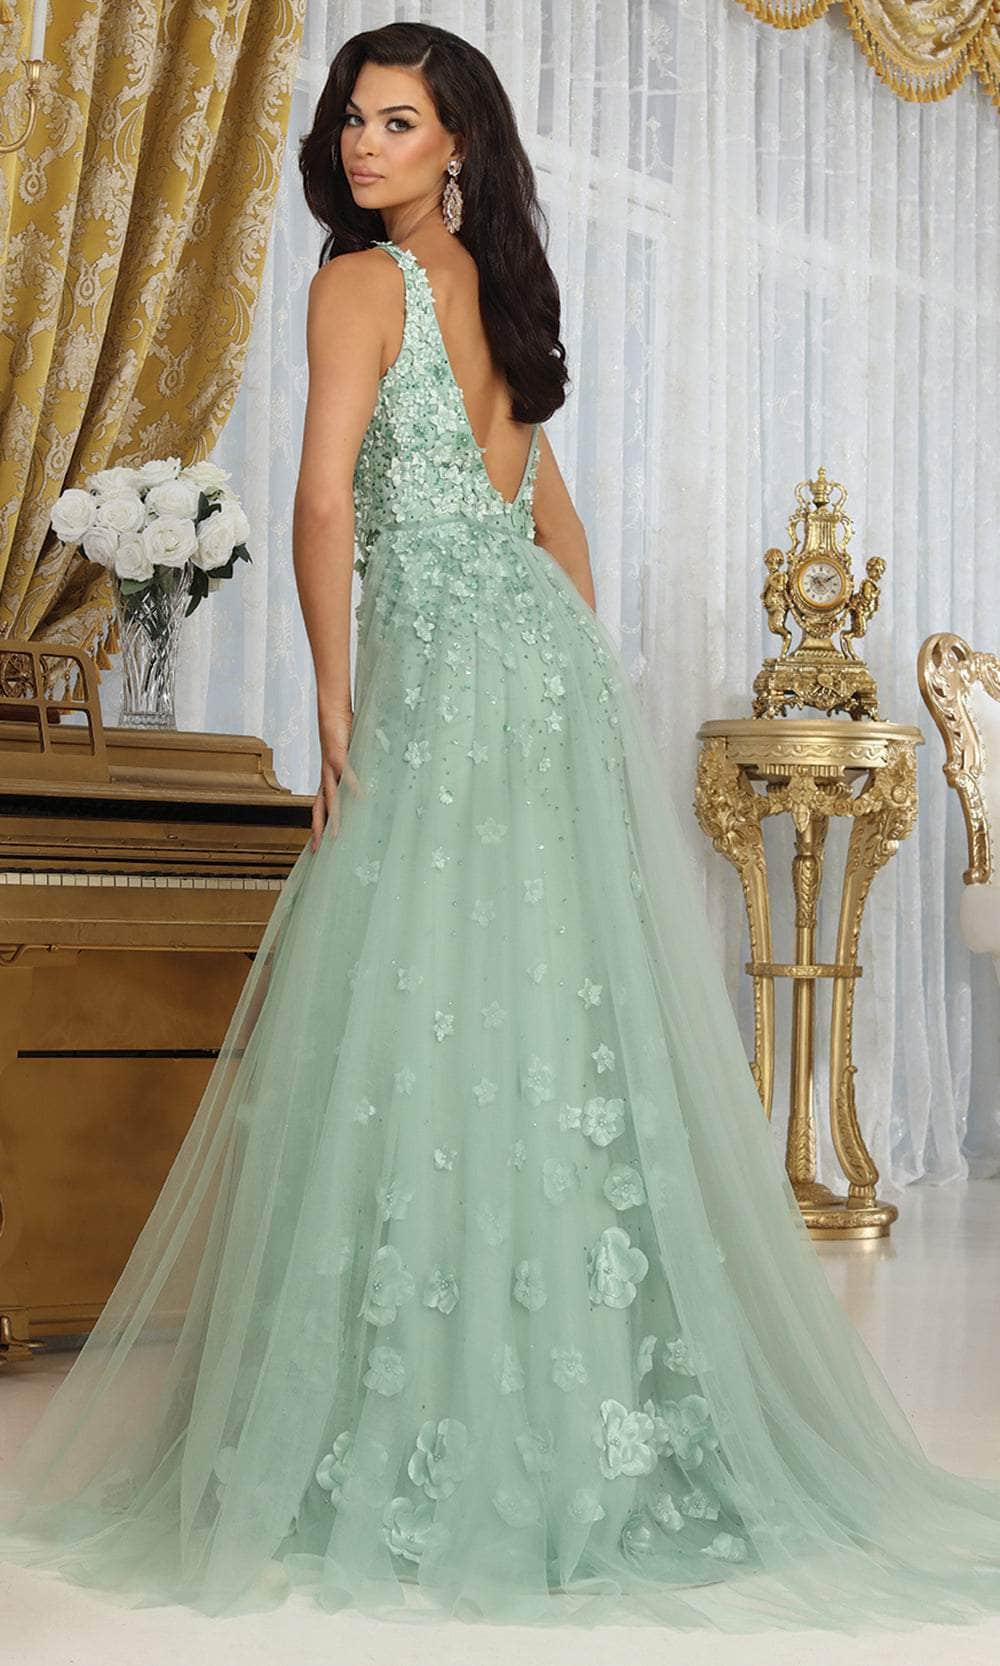 May Queen RQ8031 - Appliqued Sleeveless Prom Gown Prom Dresses